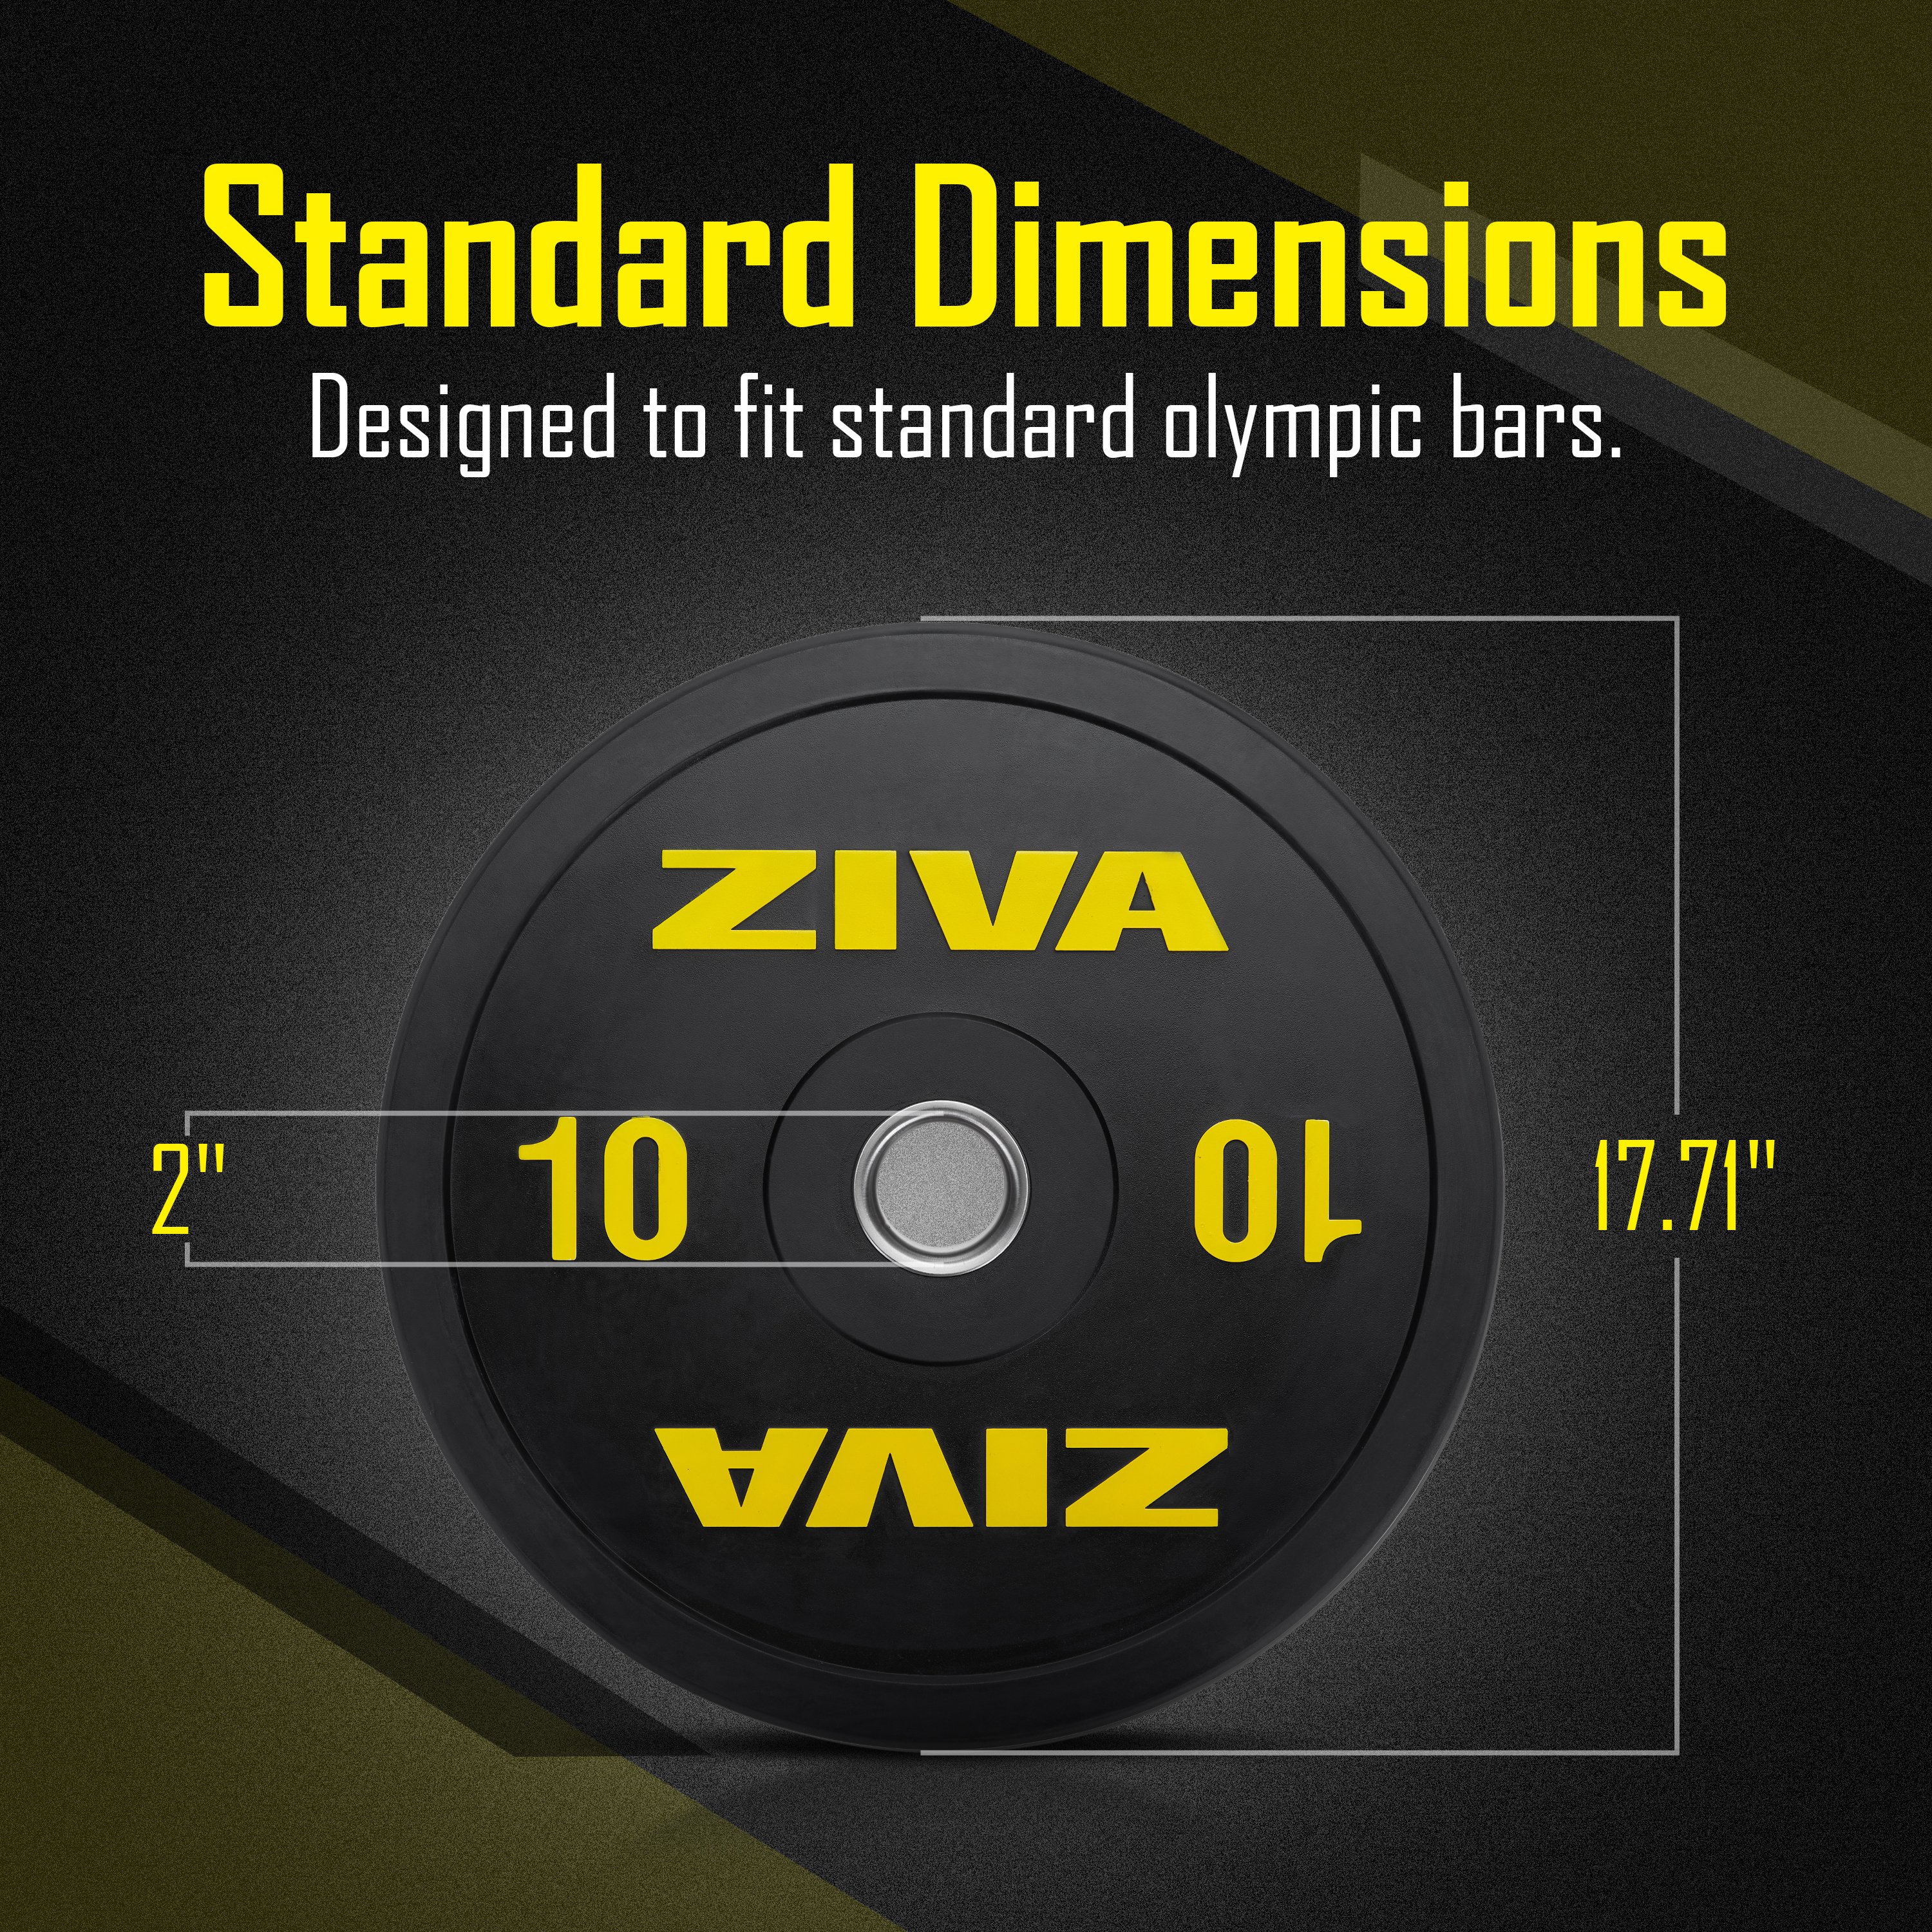 Standard dimensions. Designed to fit standard olympic bars.